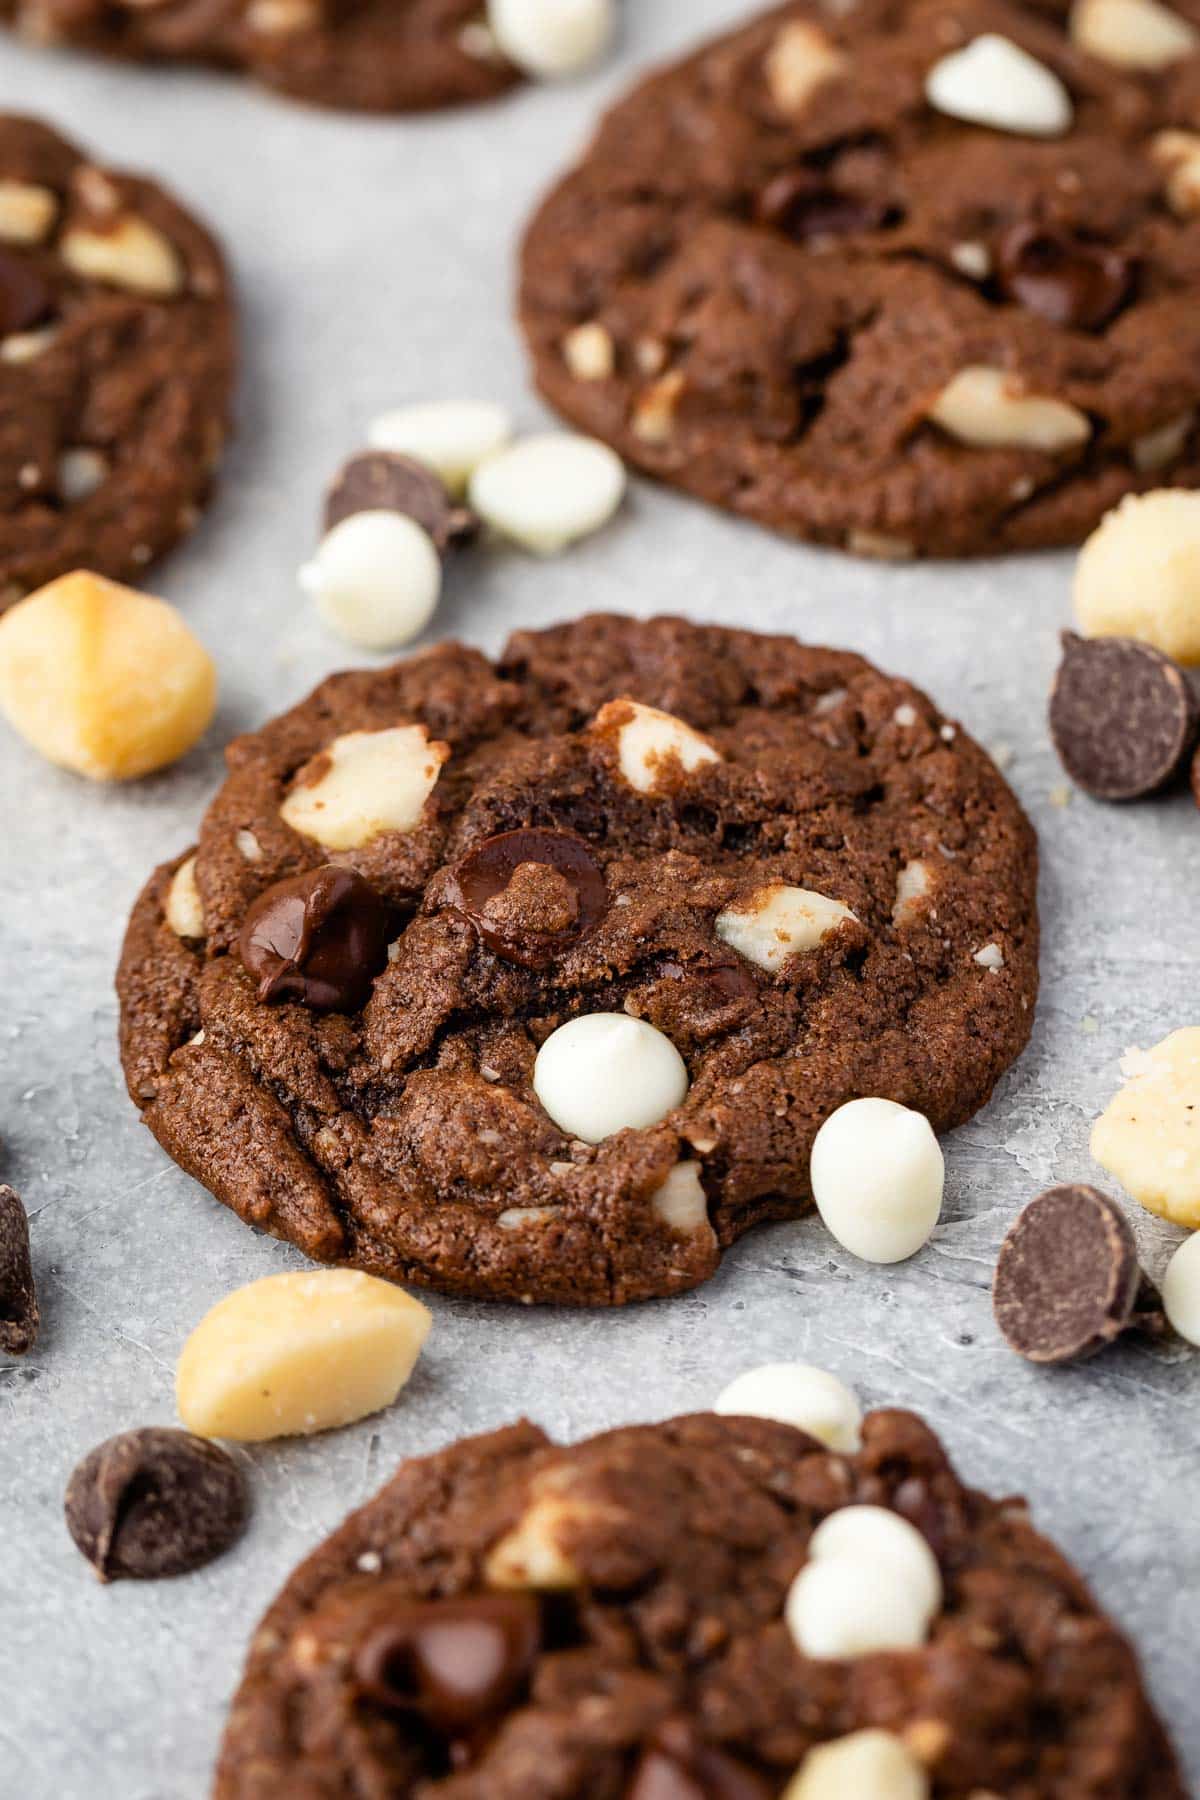 cookies with chocolate chips and macadamia nuts baked in.